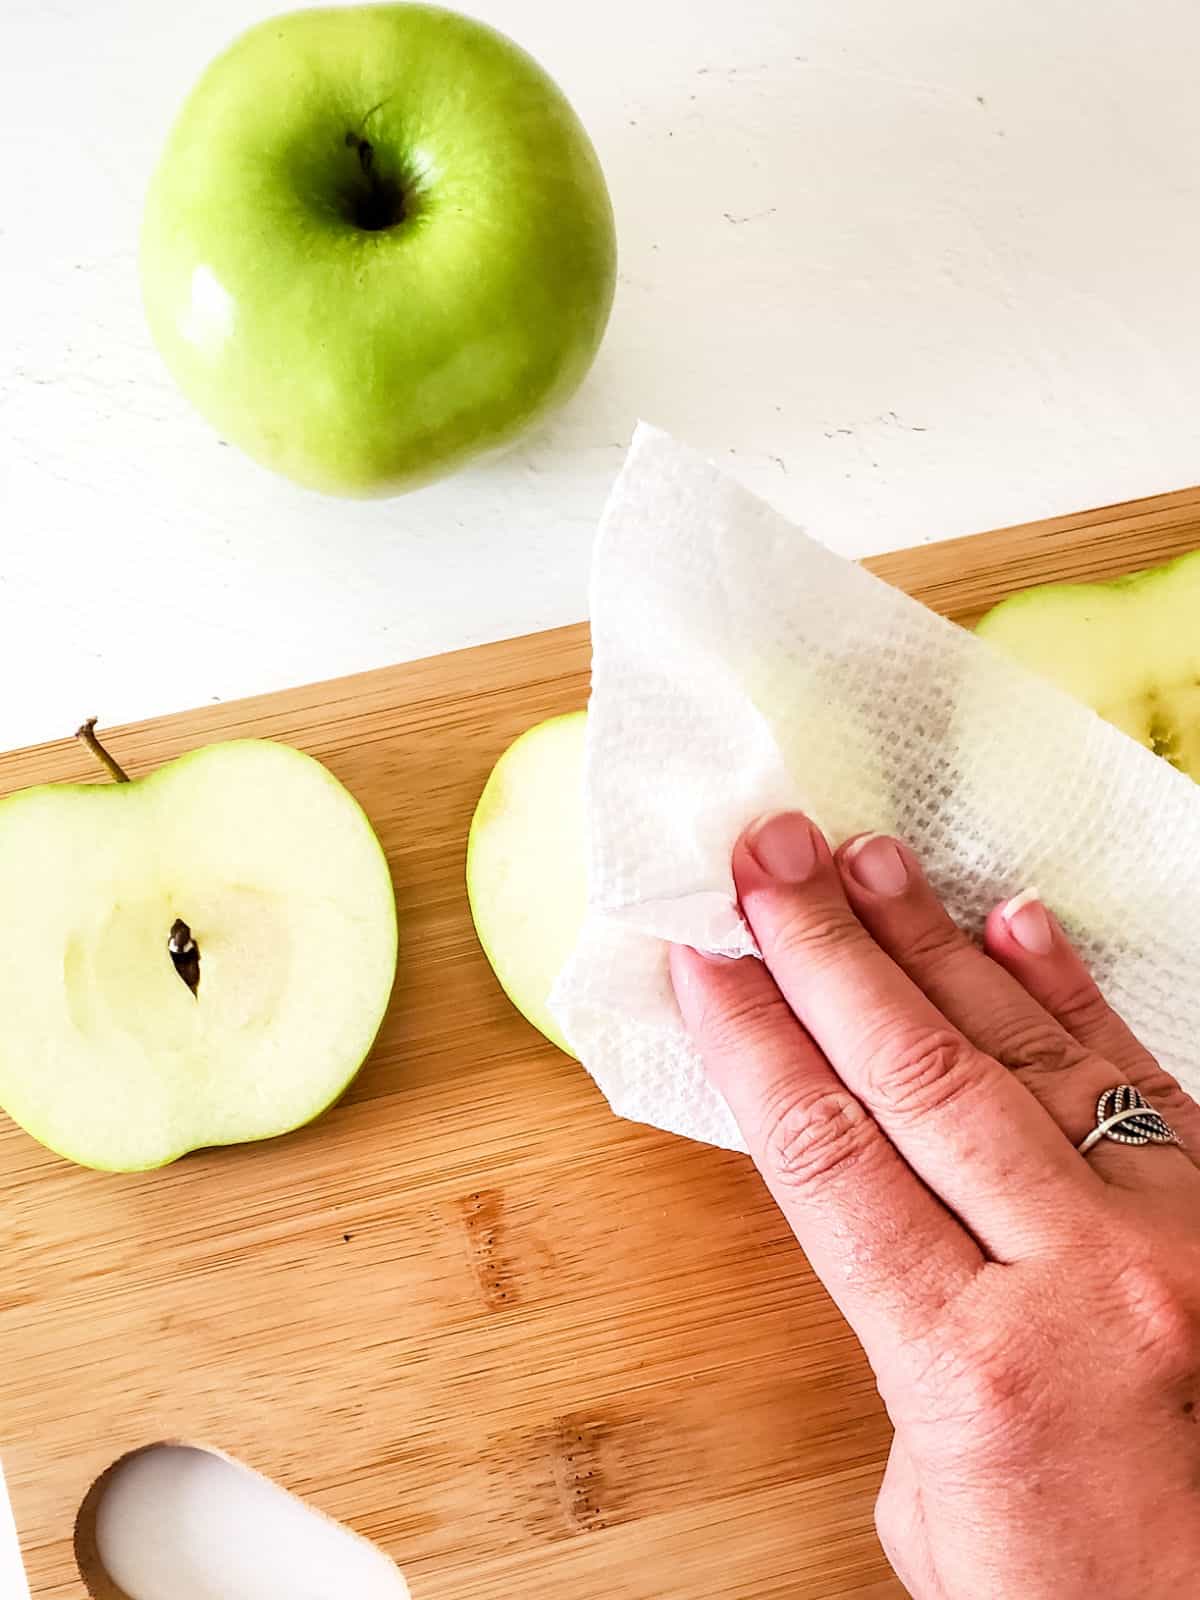 Hand blotting apple slices with paper on a wooden board. 